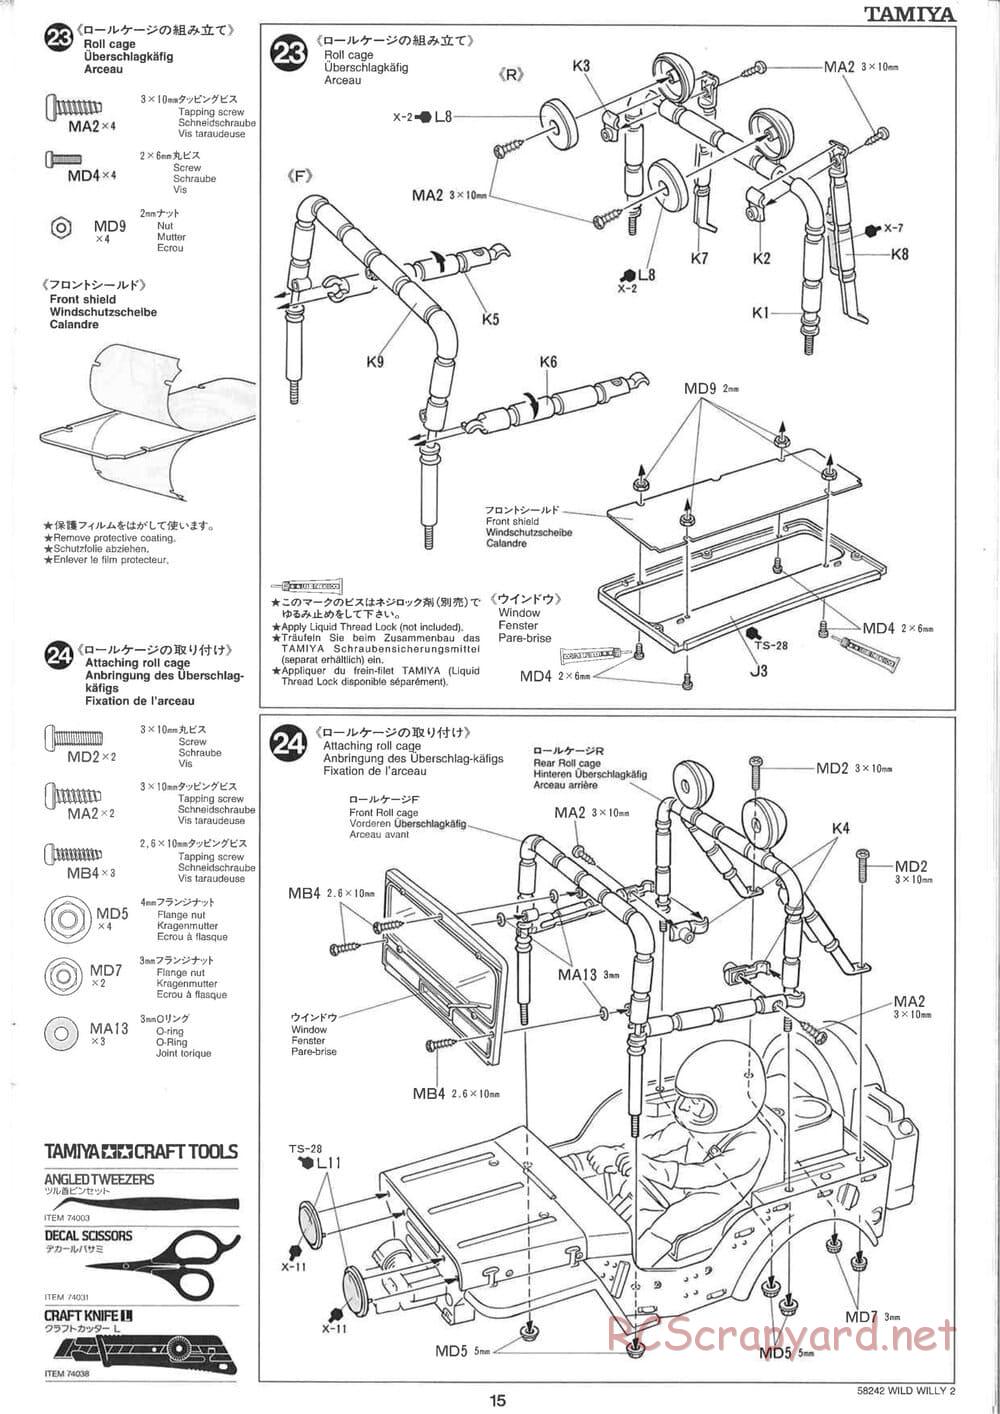 Tamiya - Wild Willy 2 - WR-02 Chassis - Manual - Page 15